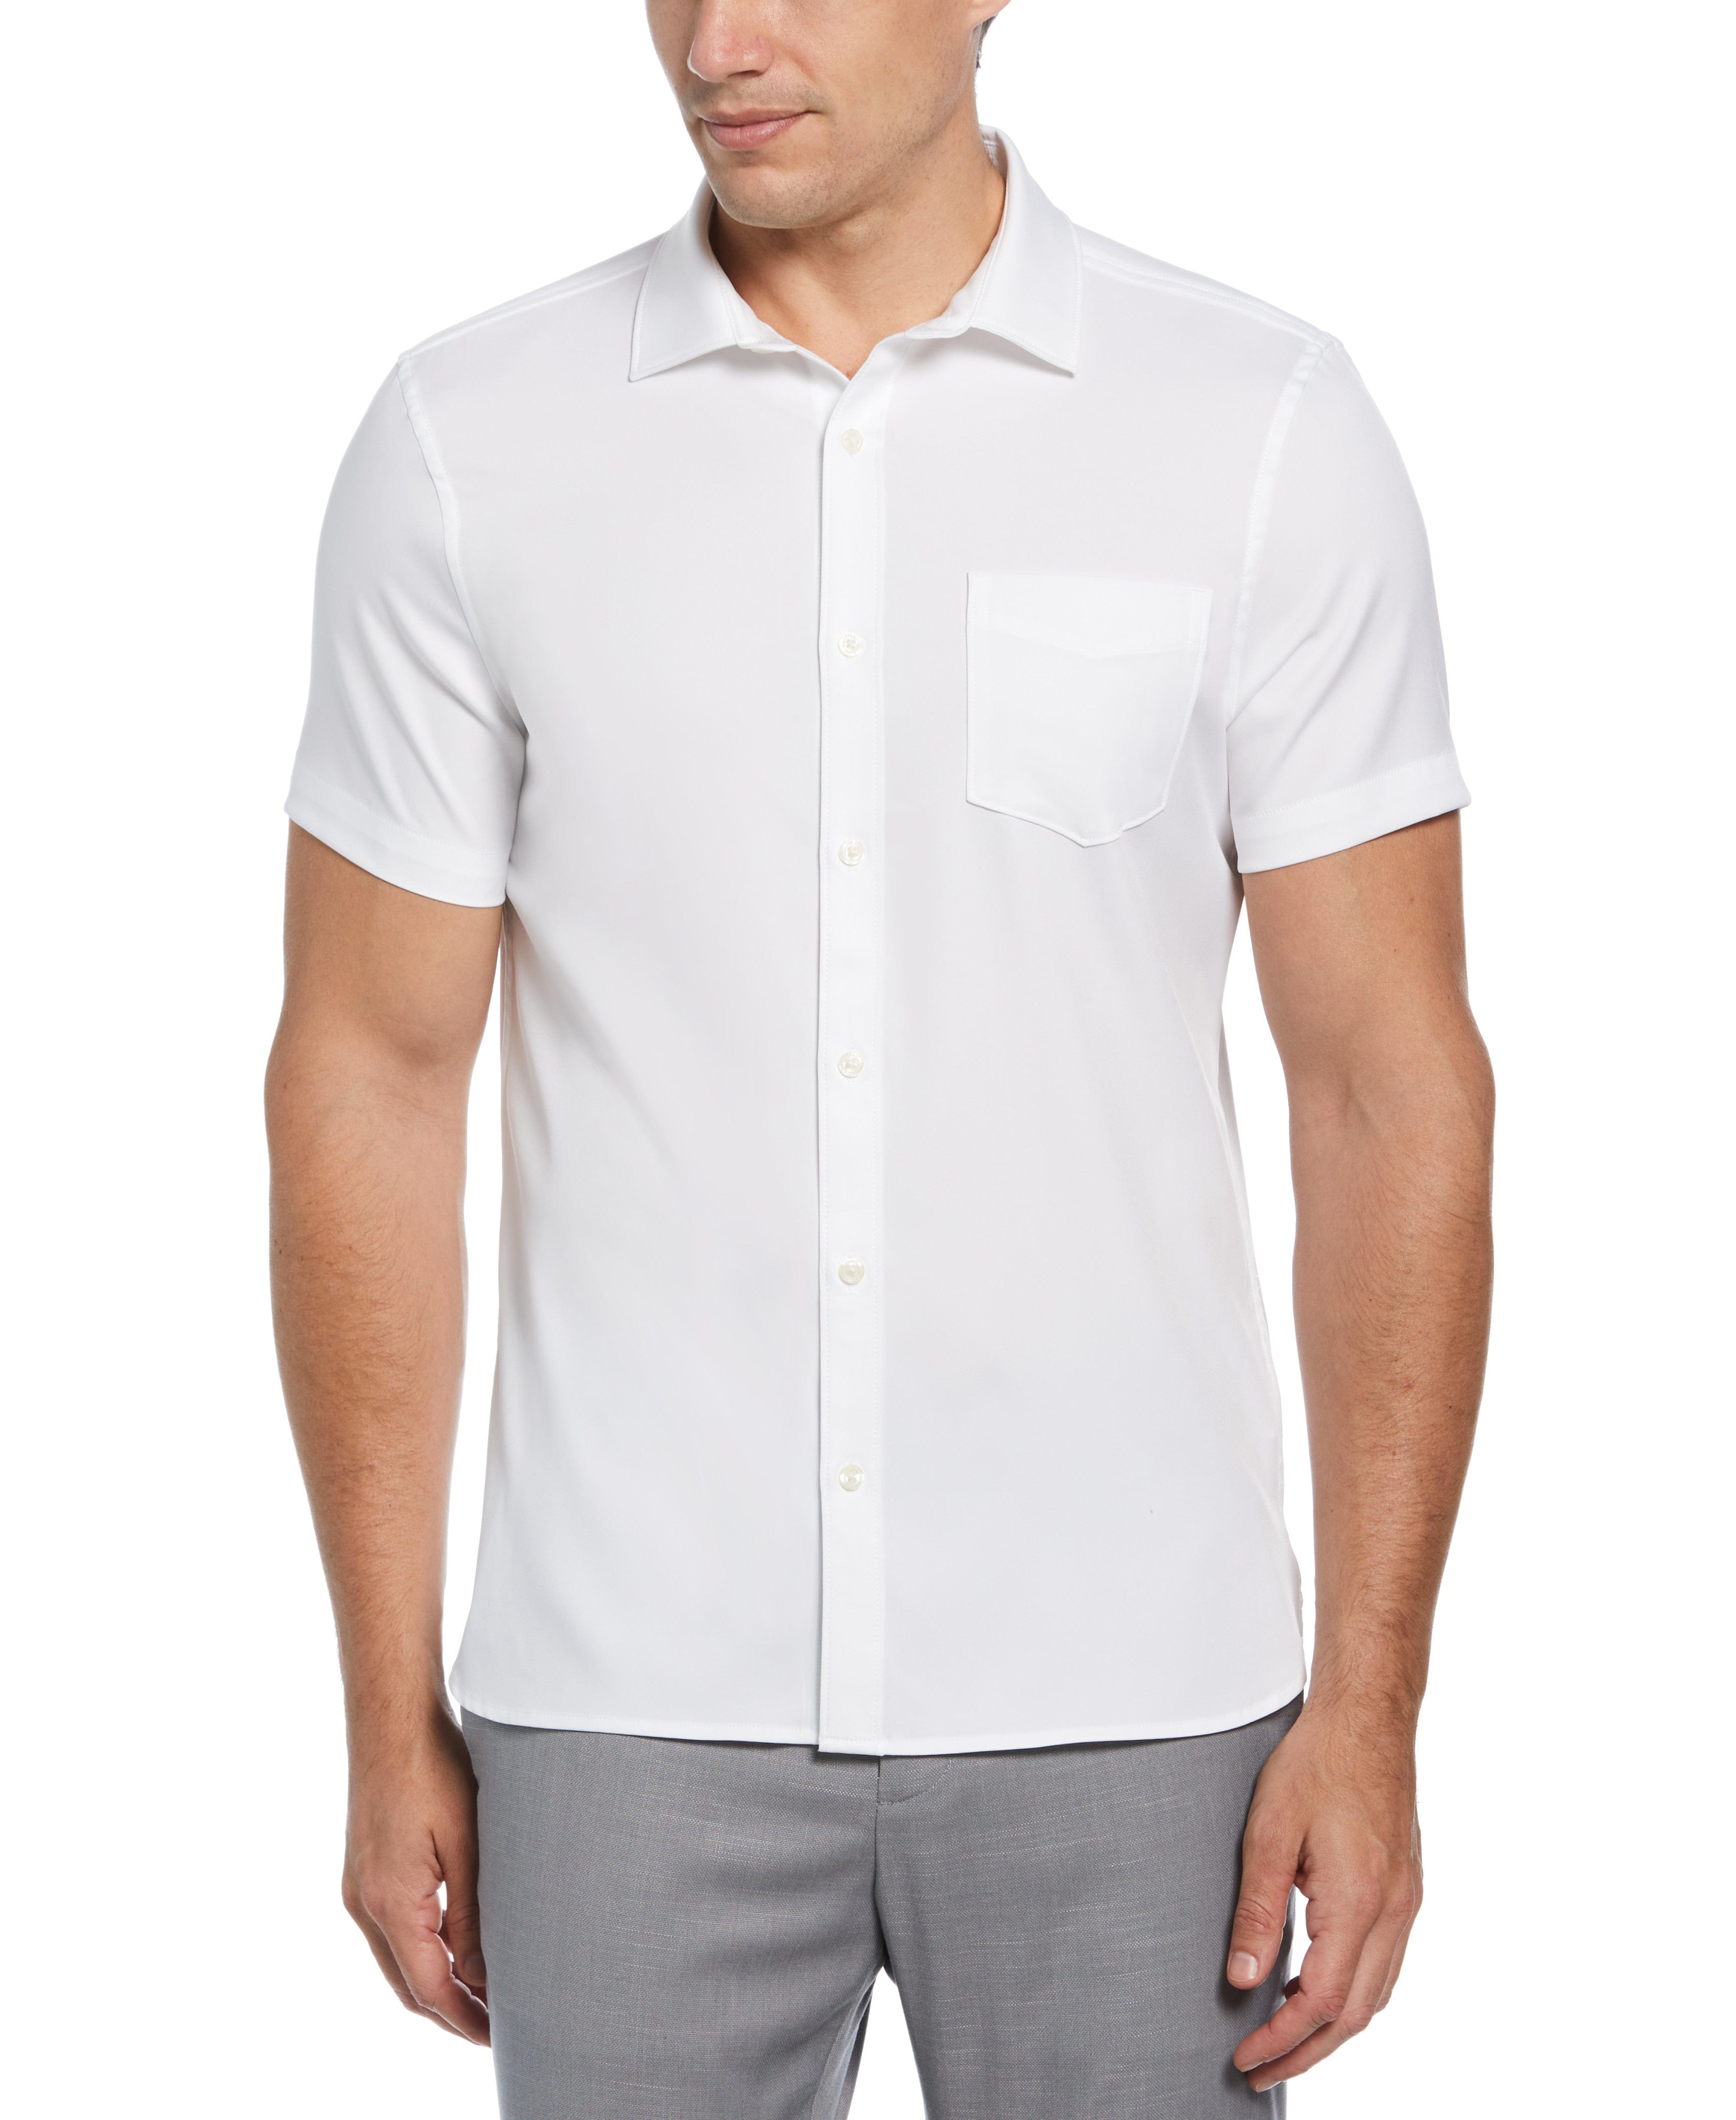 Total Stretch Slim Fit Solid Shirt | Perry Ellis